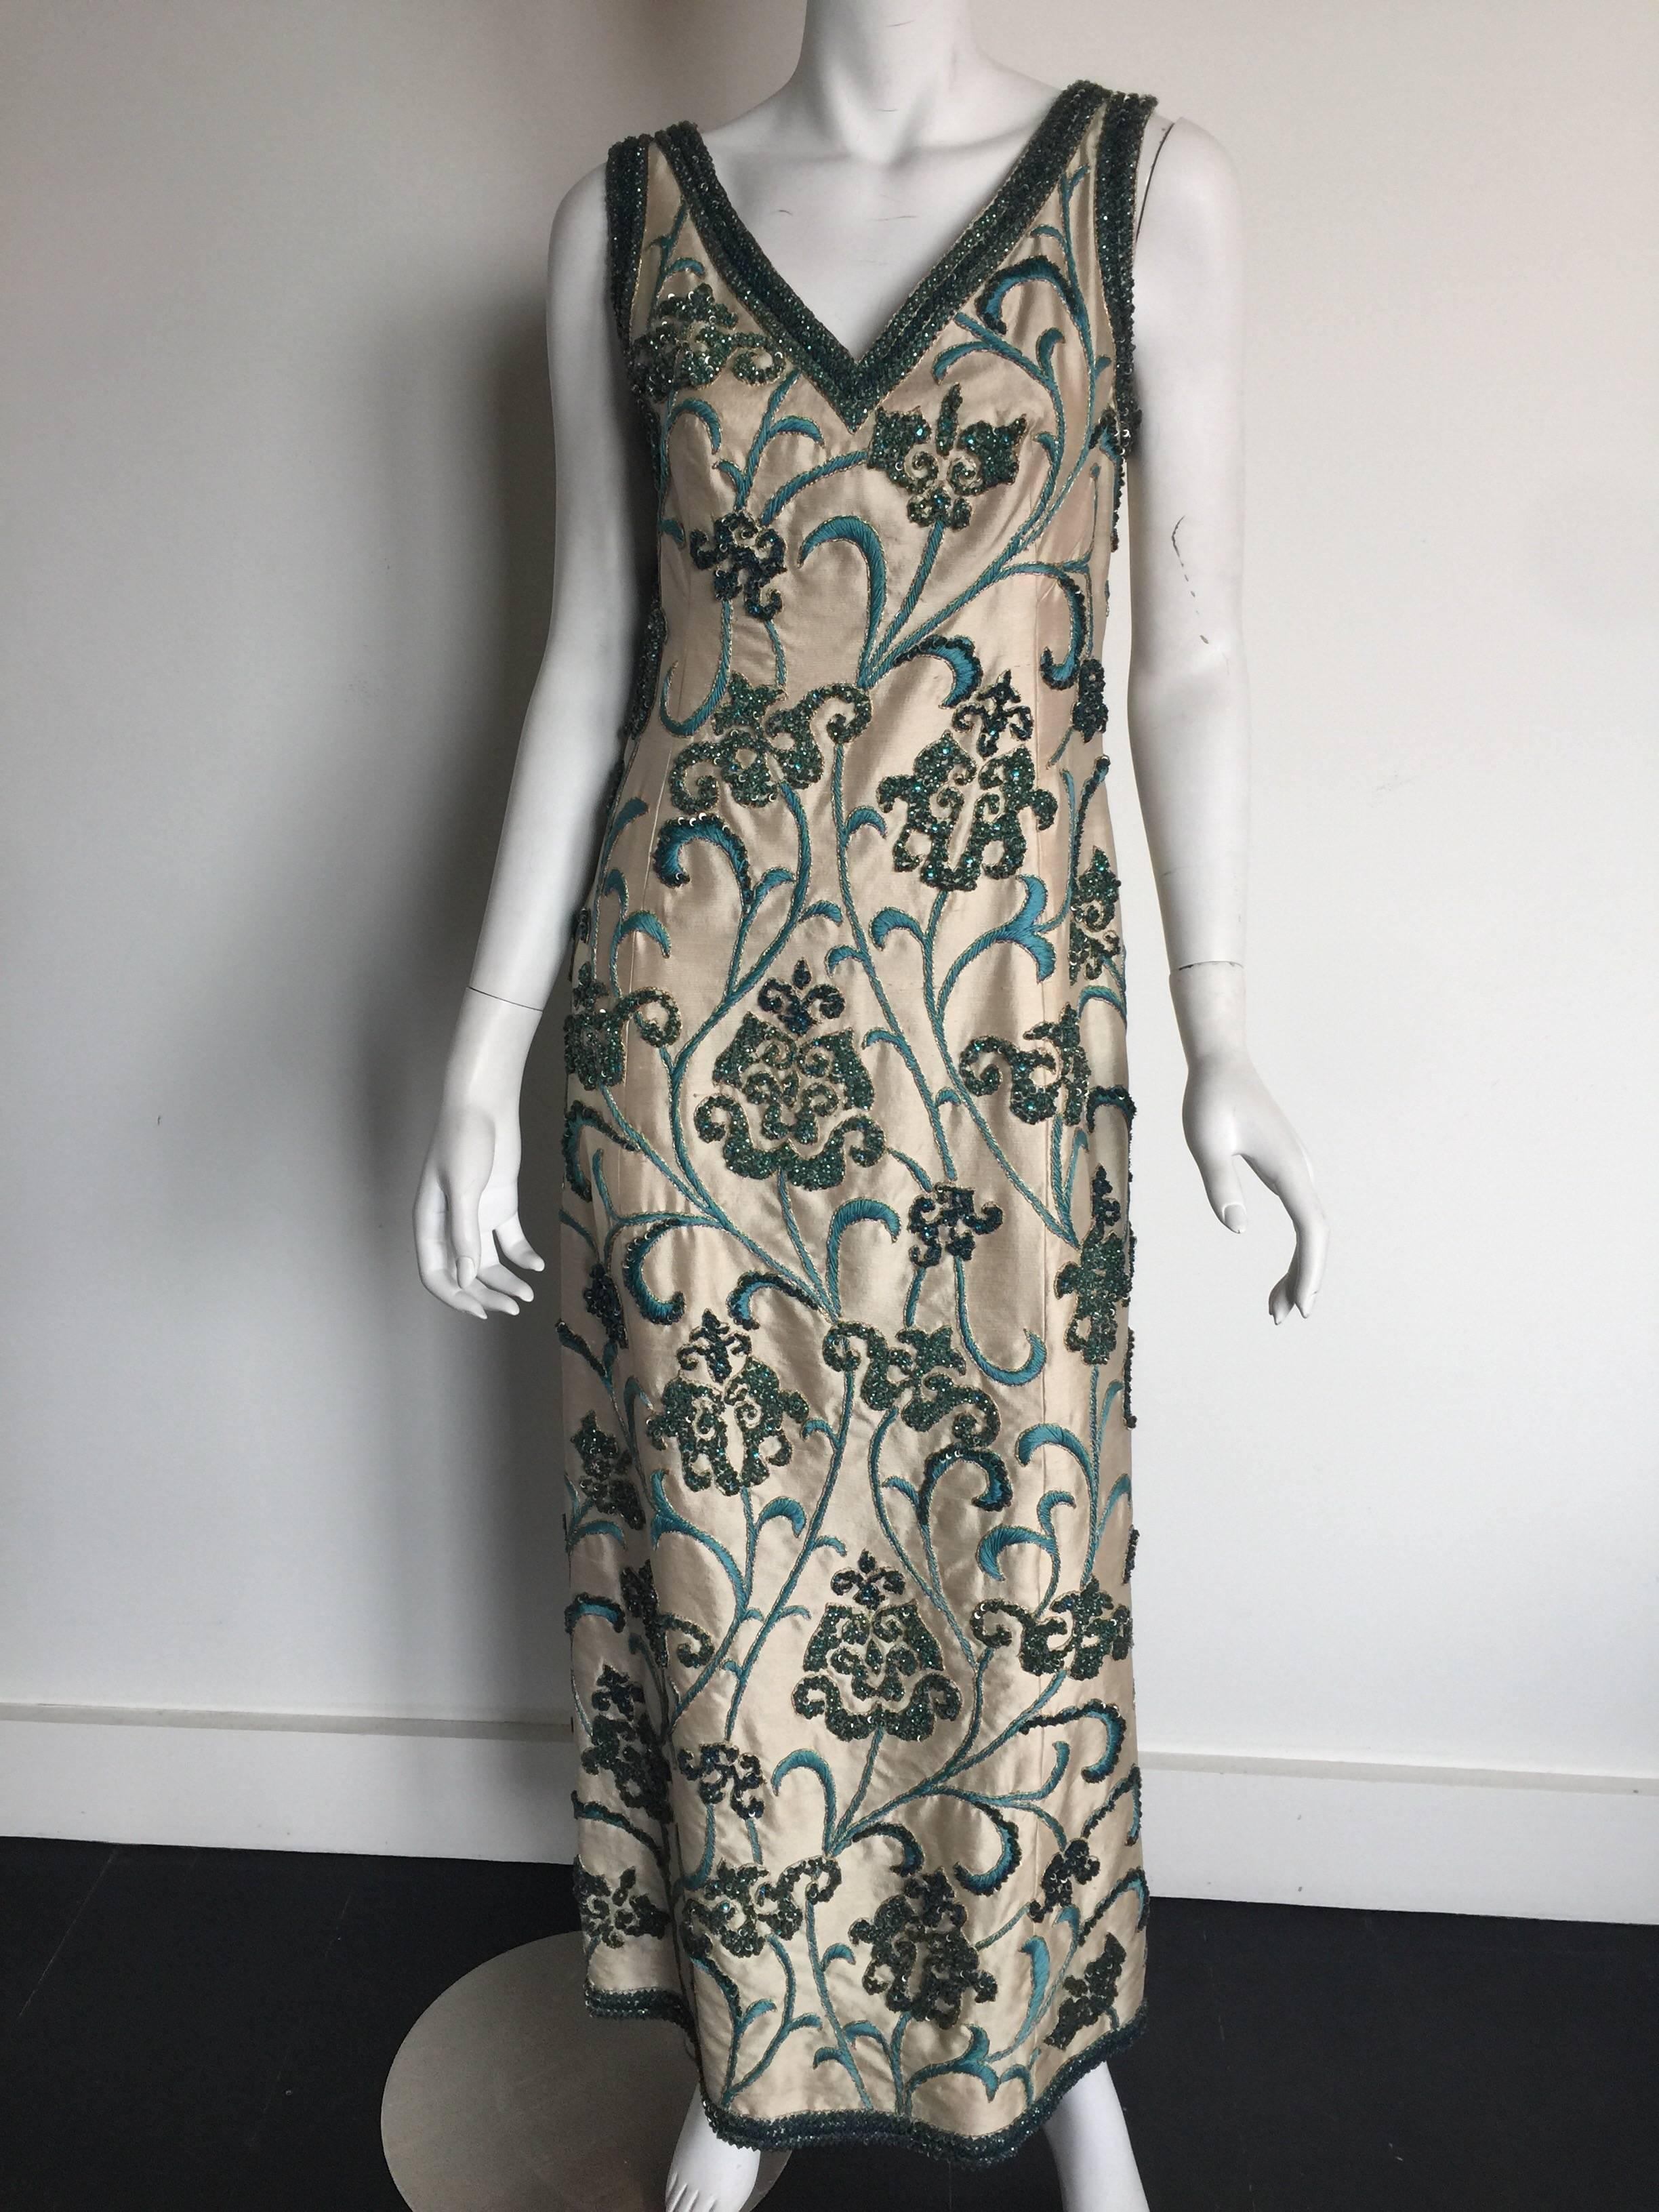 This 1960s sleeveless beaded gown is in good condition for its age.  The floral blue and turquoise beading is beautiful and it fits roughly a 2-4 but please check measurements for exact sizing as it was a custom pieces.  This is from the archive of